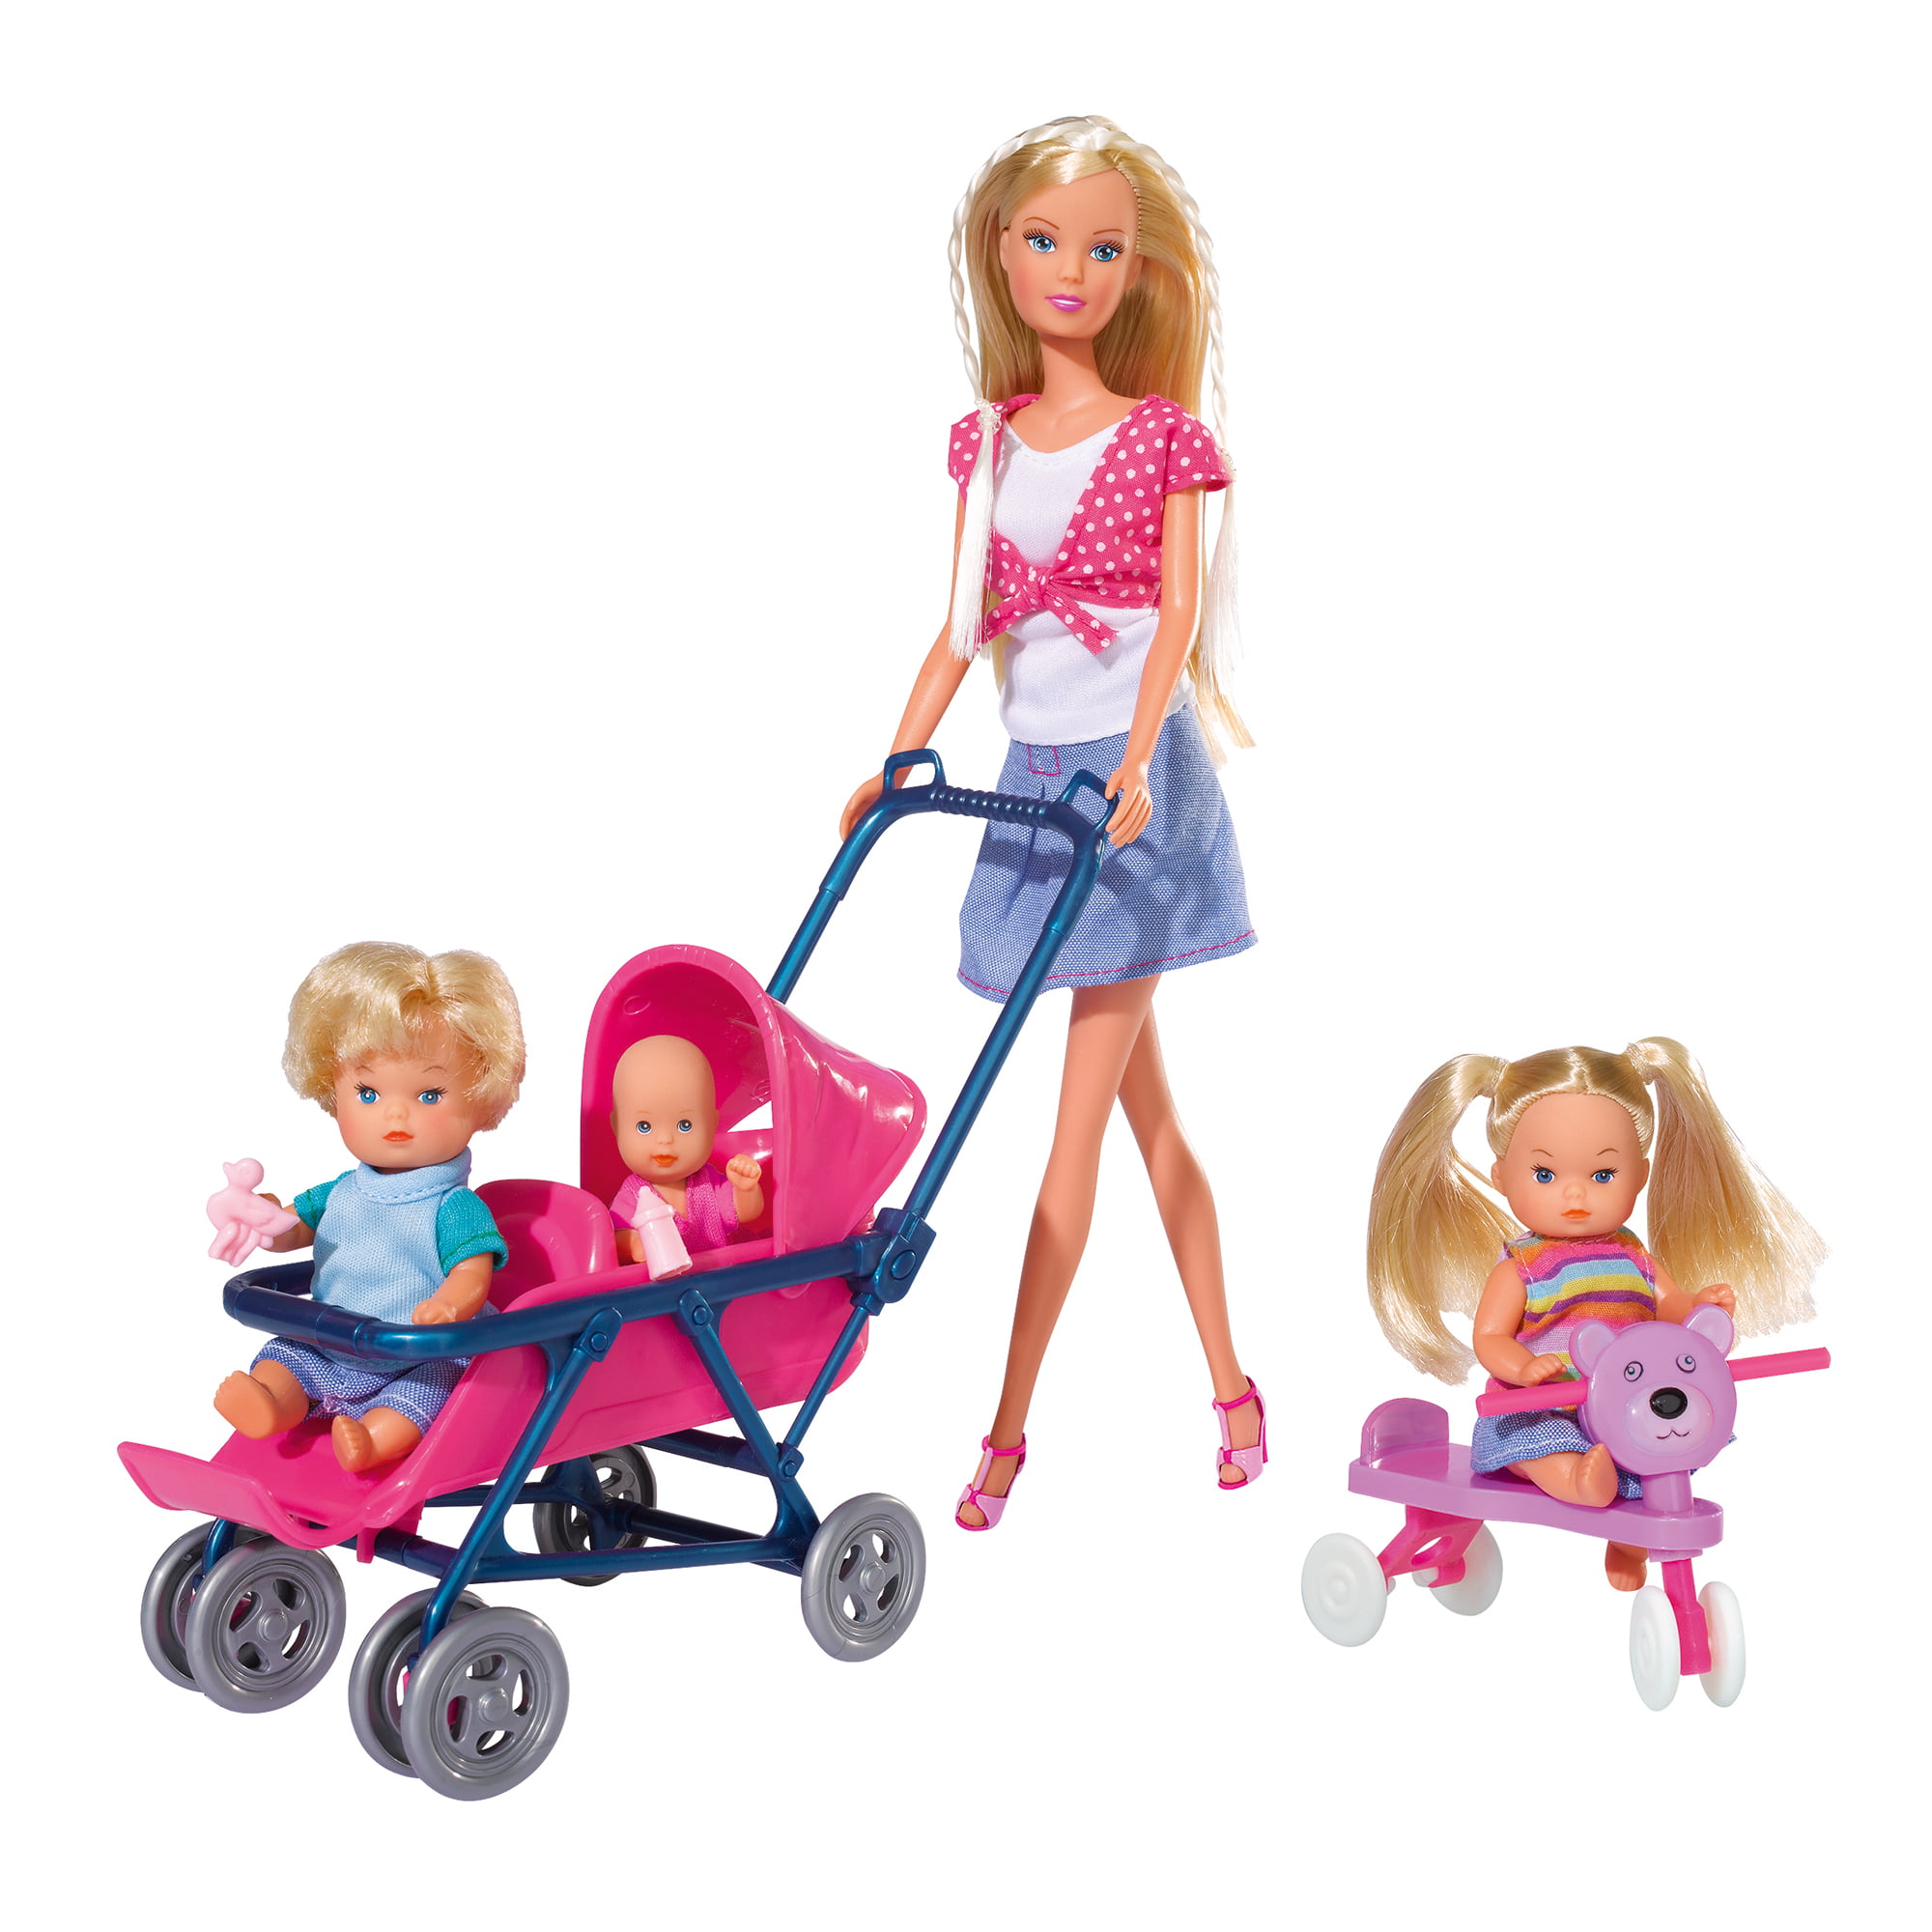 Steffi Love Baby World Set For Girl Perfect Doll Present /1 Mum and 3 babies/ 